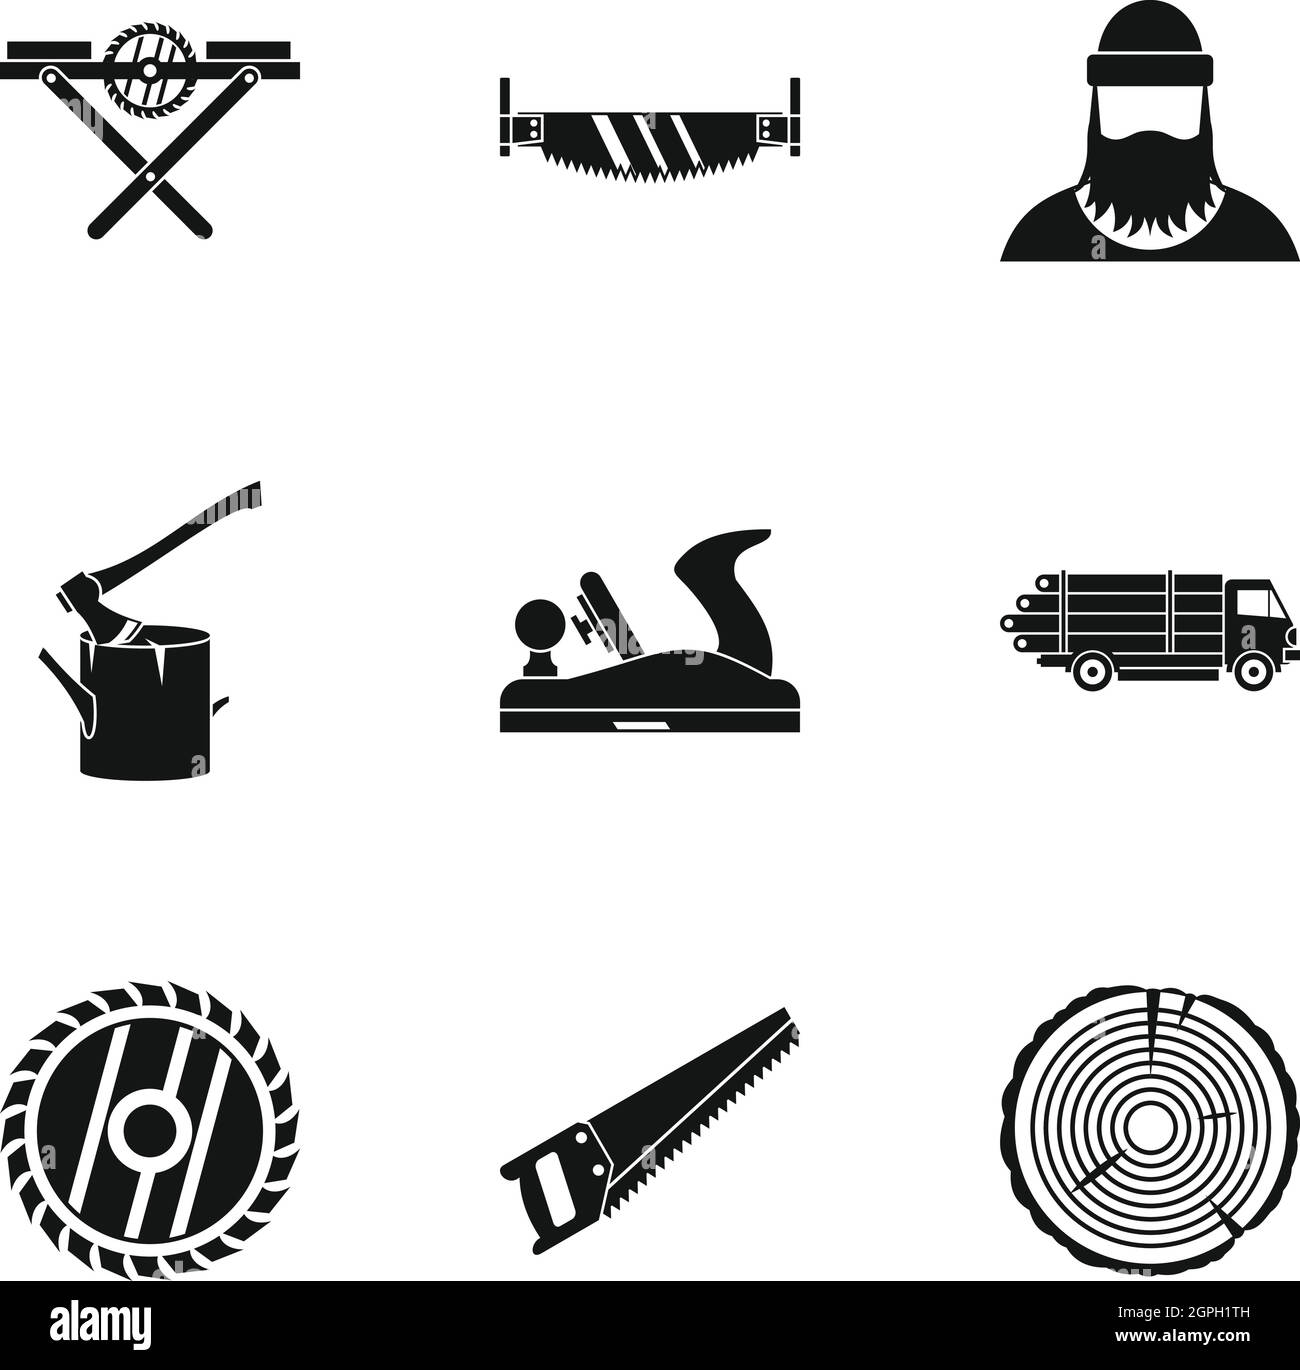 Sawing icons set, simple style Stock Vector